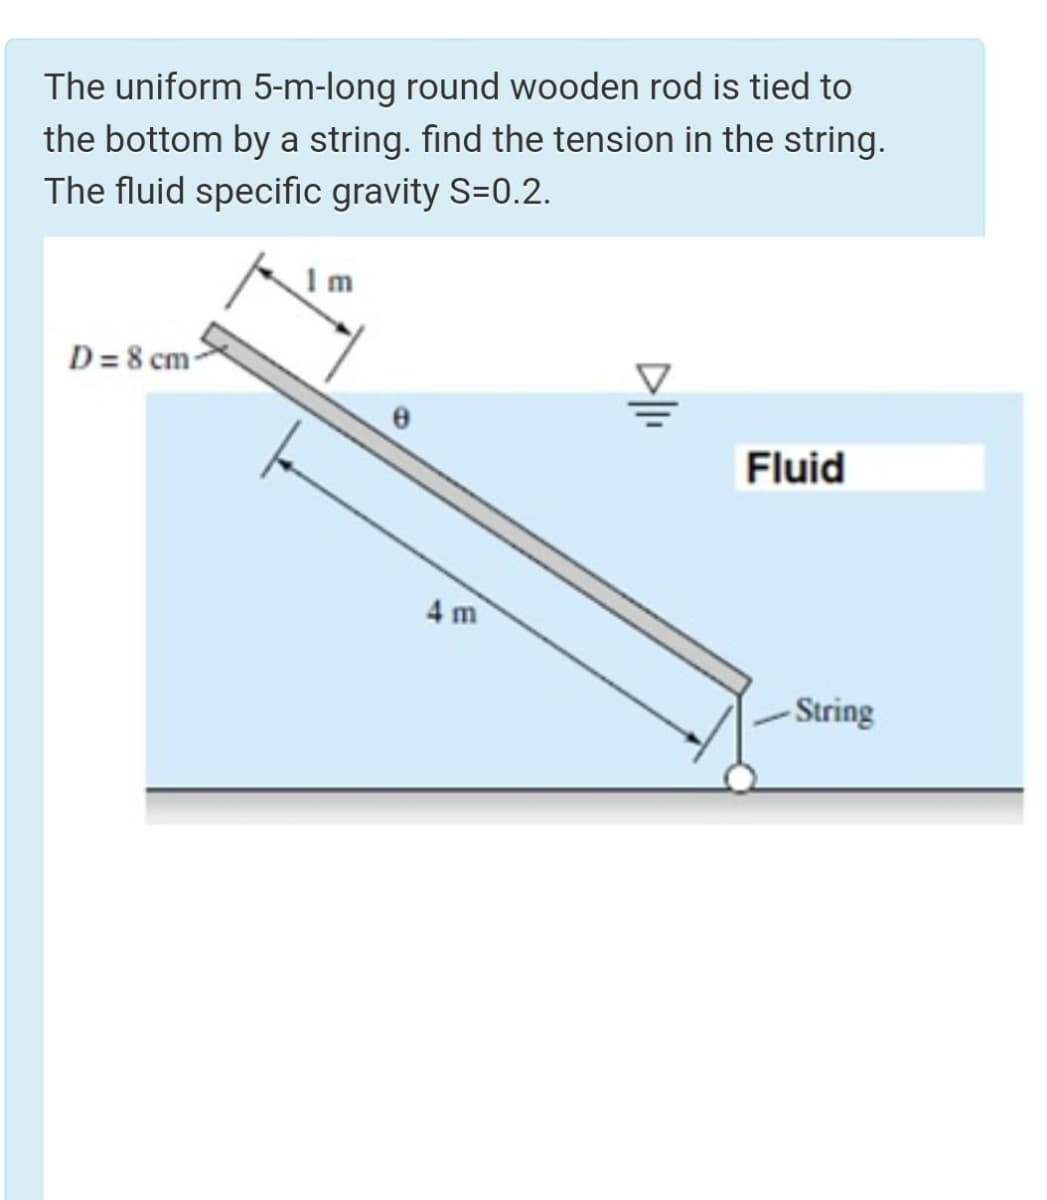 The uniform 5-m-long round wooden rod is tied to
the bottom by a string. find the tension in the string.
The fluid specific gravity S=0.2.
D= 8 cm-
Fluid
4 m
- String
